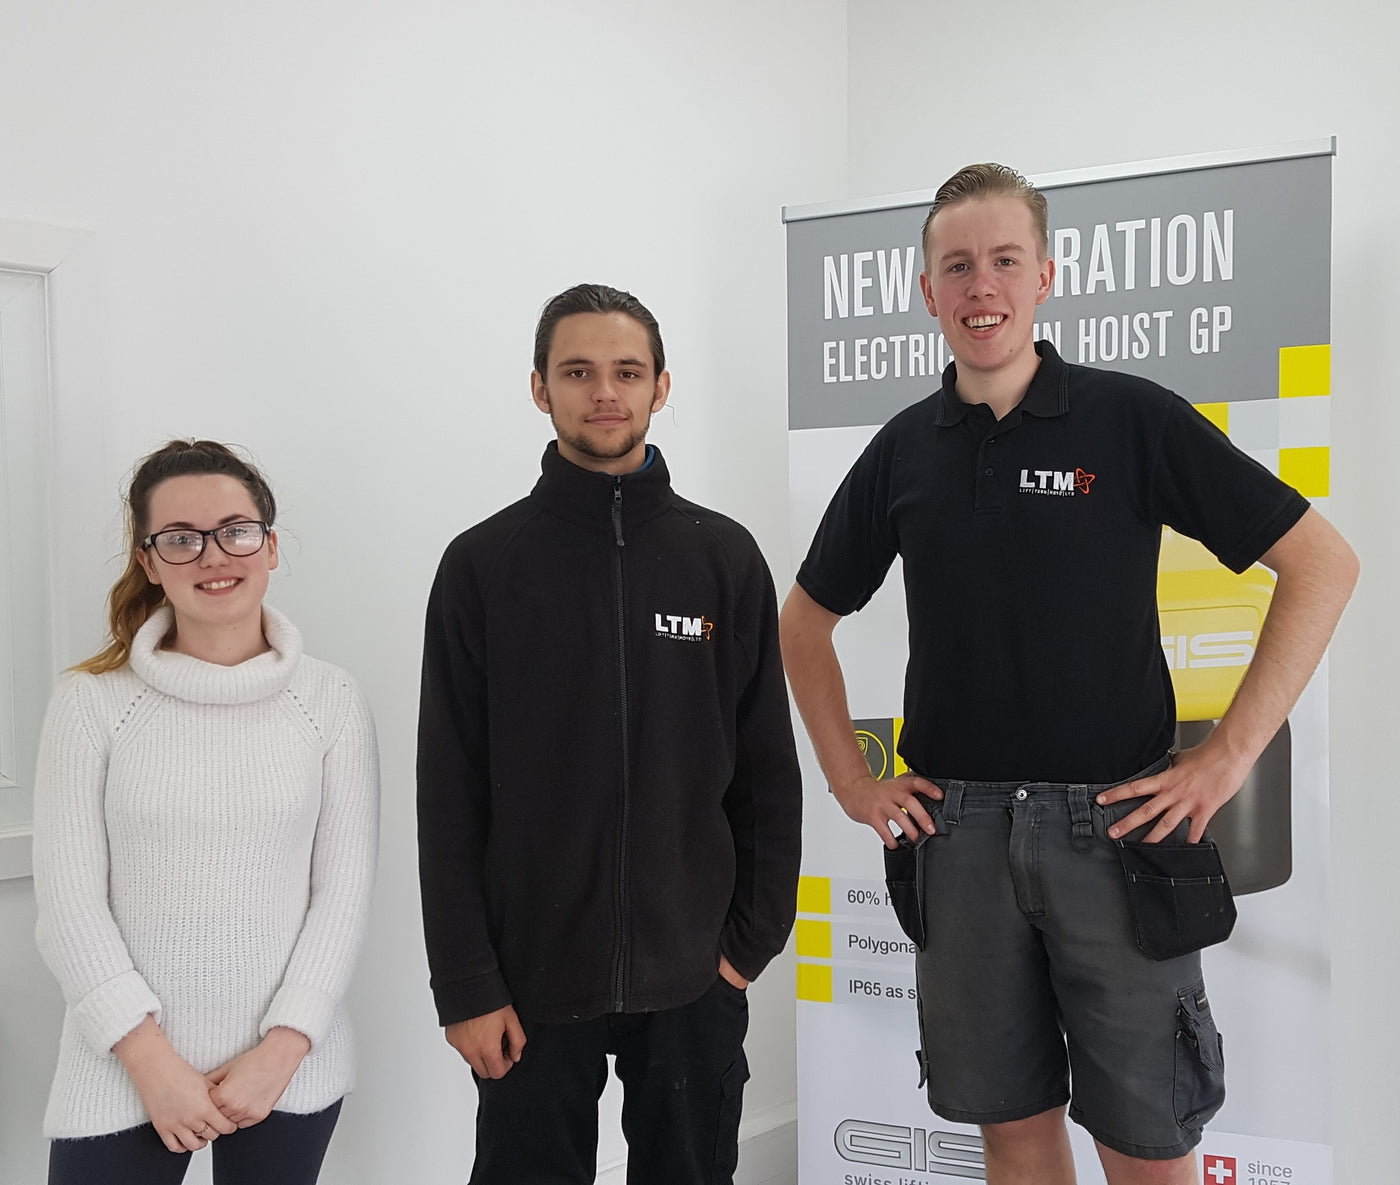 PRESS RELEASE - Two LTM Apprentices Now Full Time Staff Members